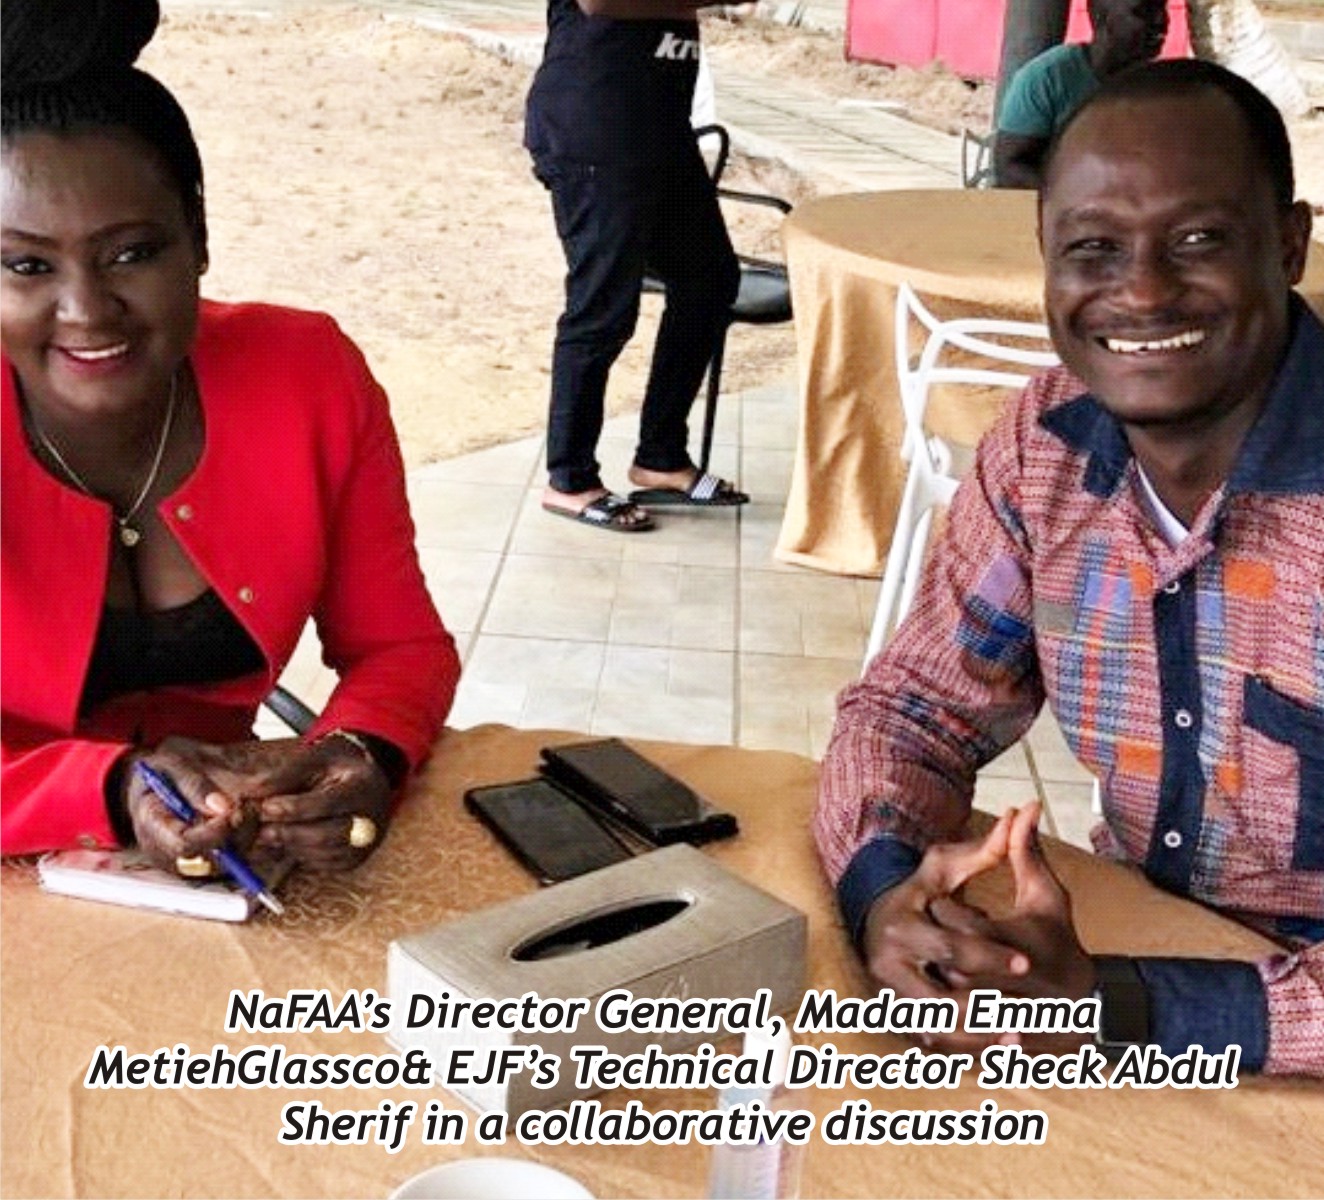 NaFAA and EJF collaborate to support sustainable fisheries in Liberia - The New Dawn Liberia